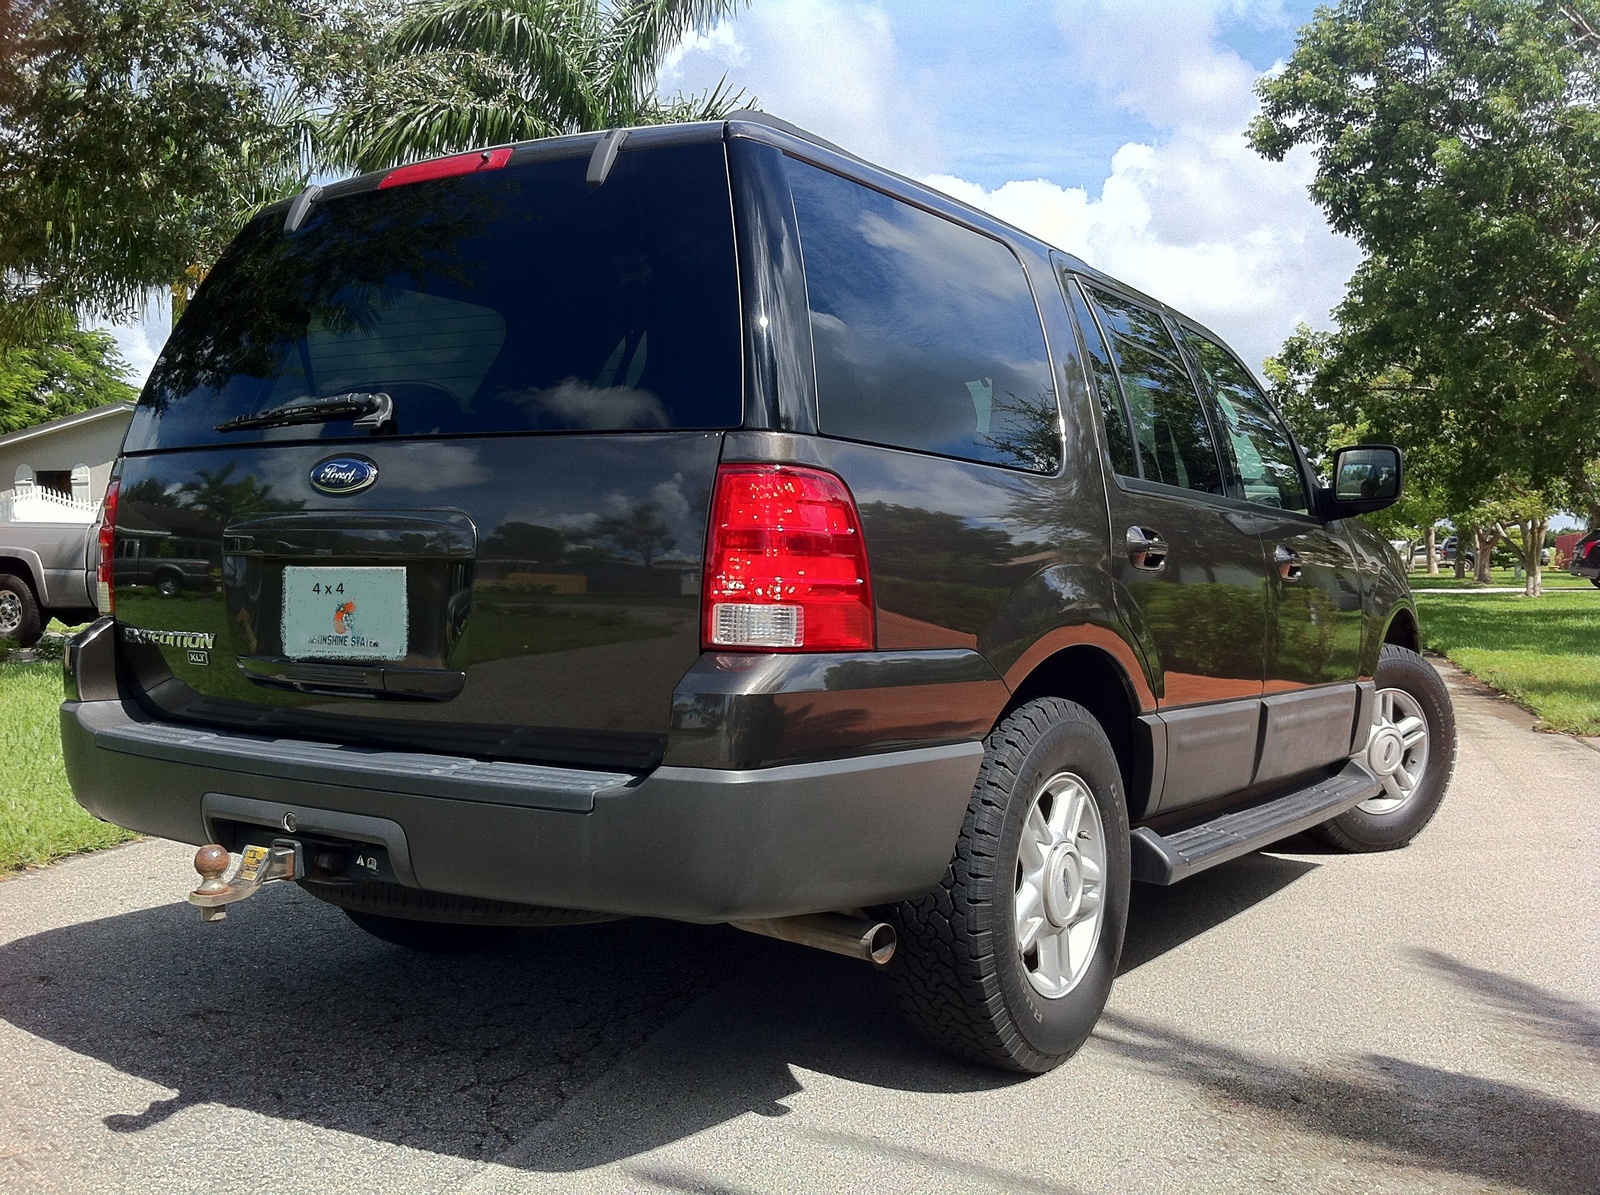 2006 Ford expedition xls review #1